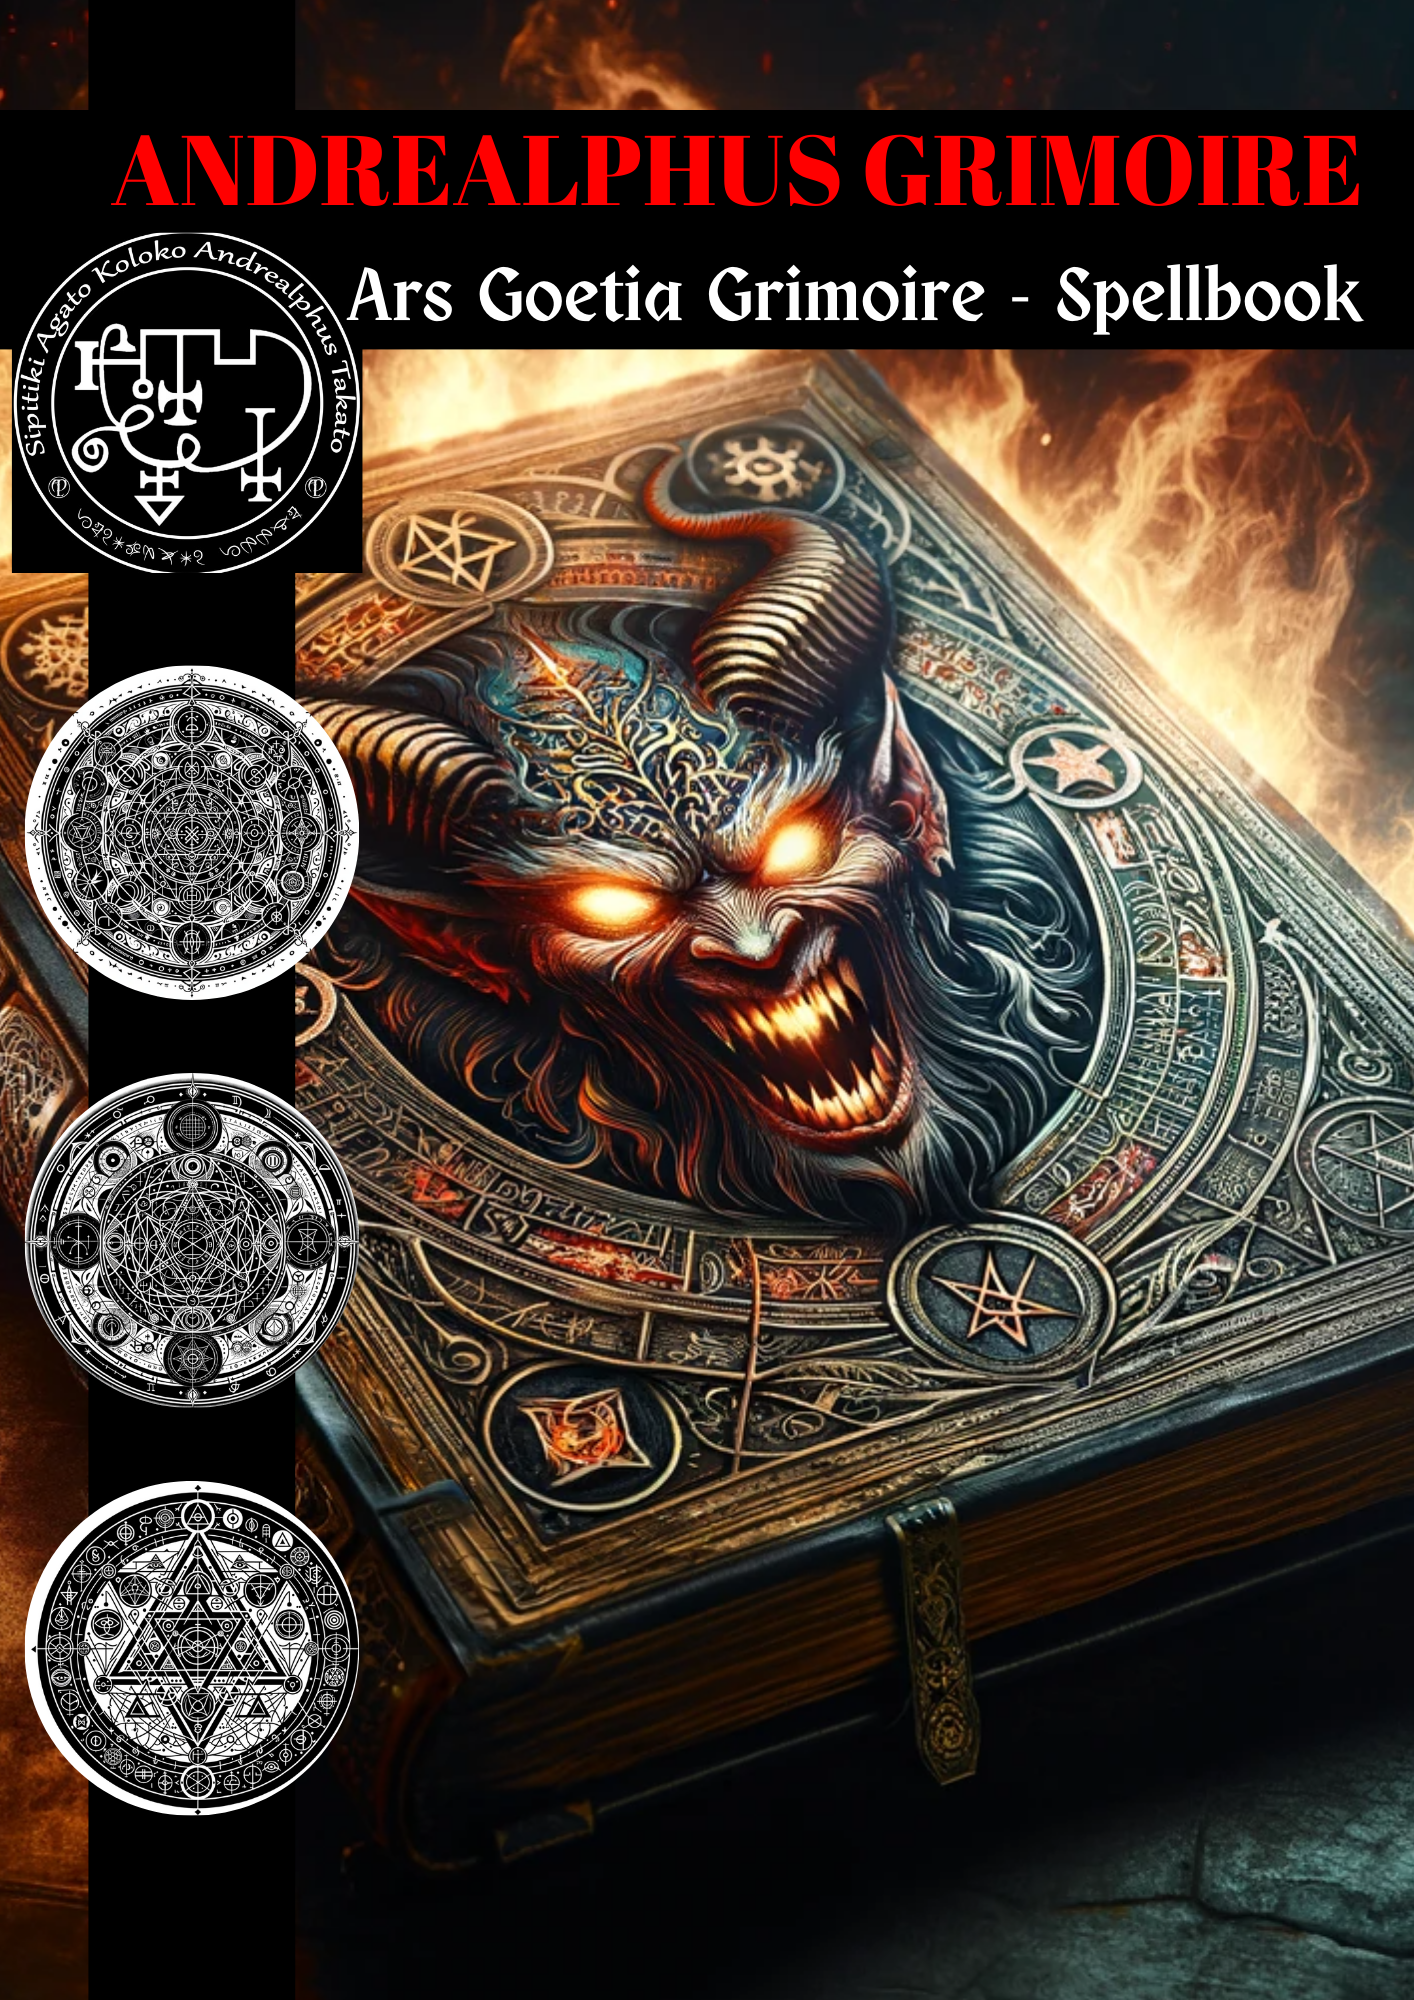 Grimoire of ANDREALPHUS Spells & Rituals to dissolve magic and close situations by eliminating any every magic and to Empower Yourself - Abraxas Amulets ® Magic ♾️ Talismans ♾️ Initiations